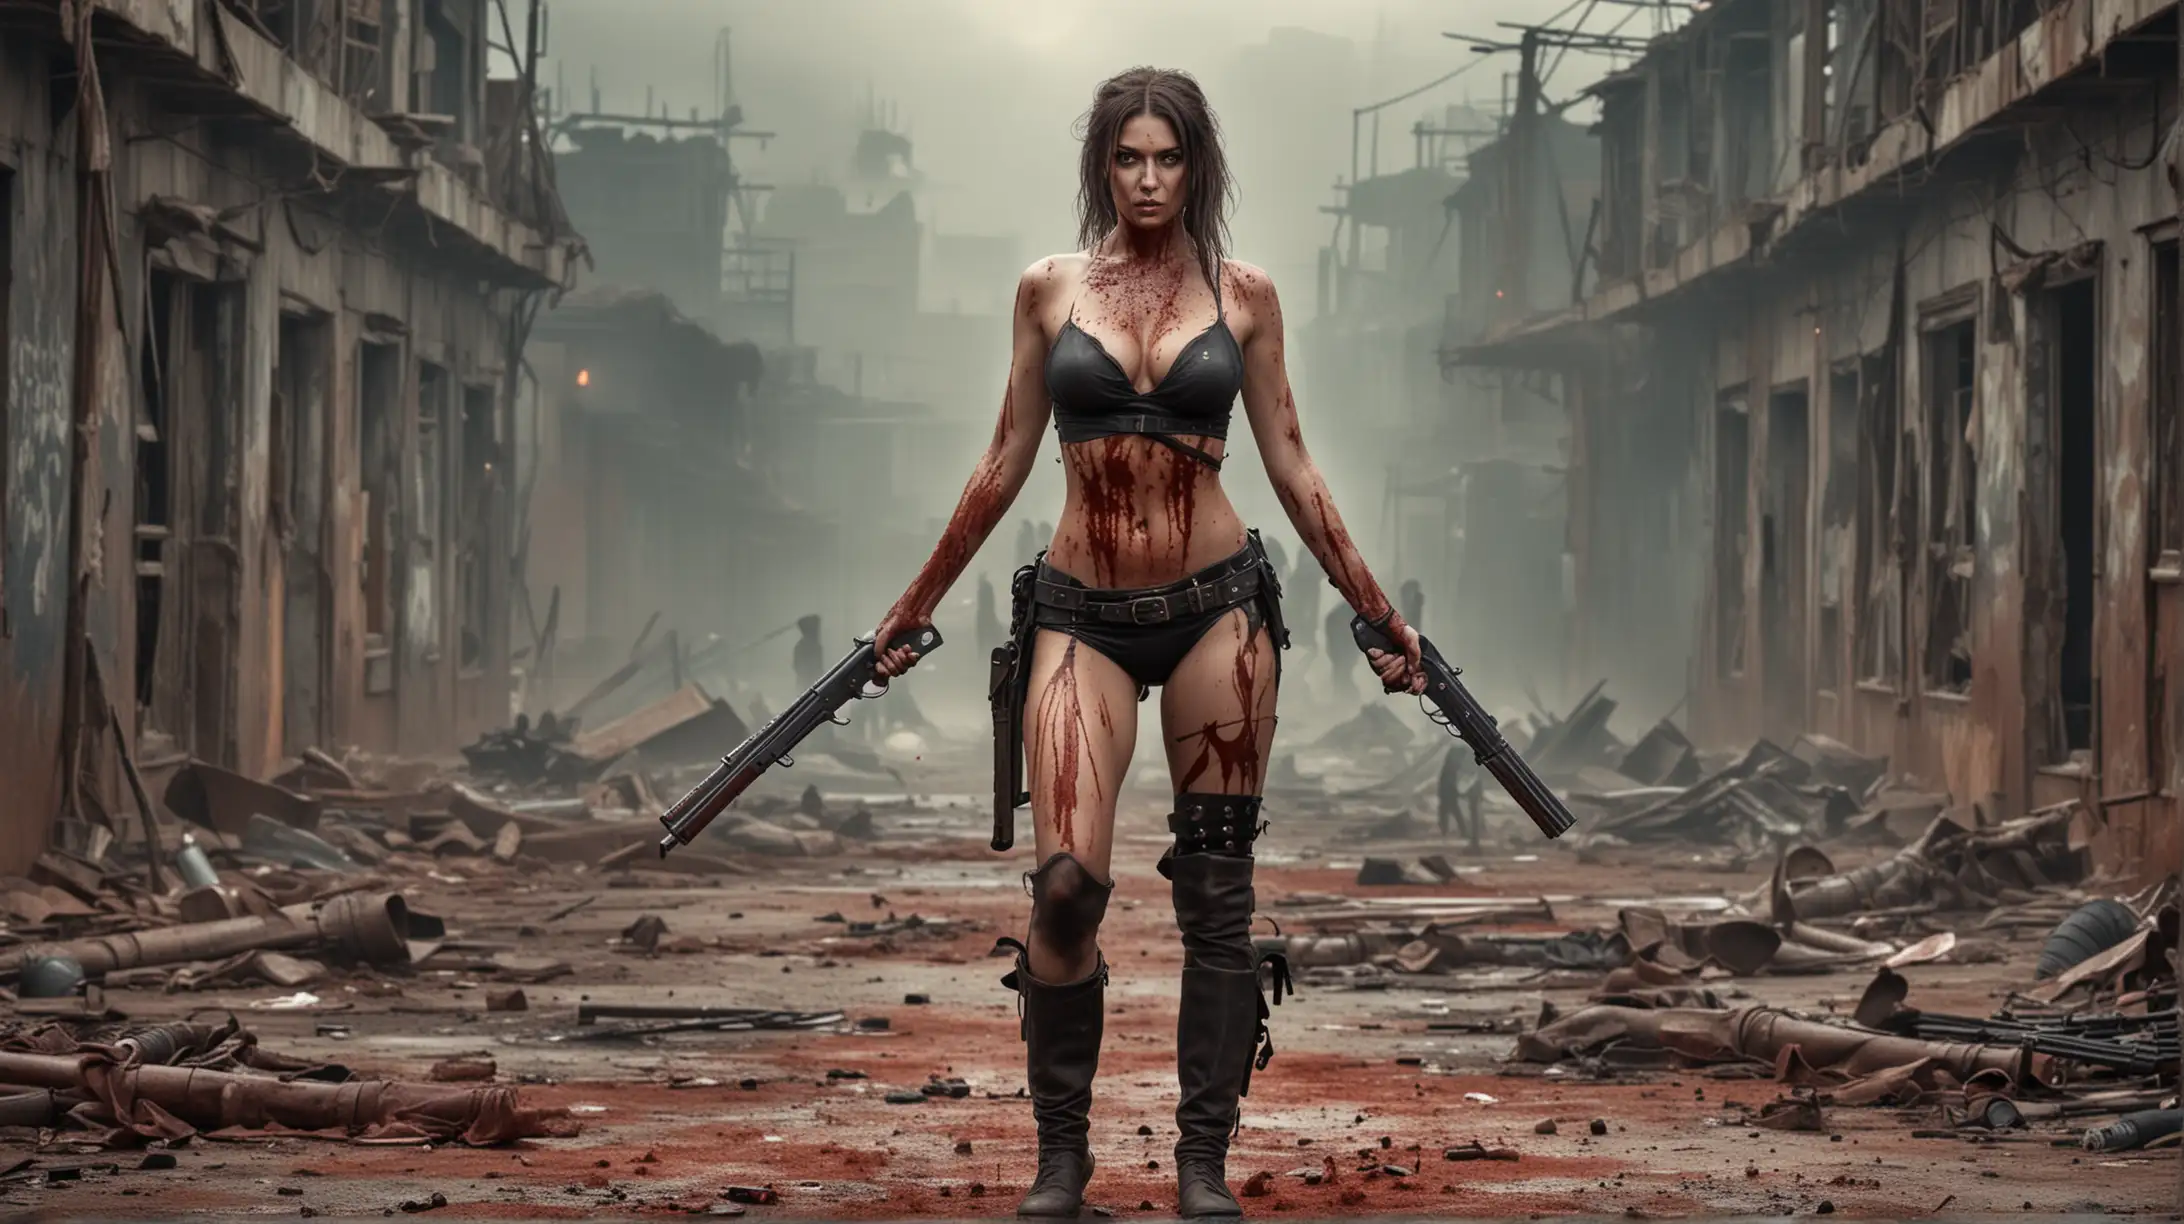 sexy woman bloody shooting battle. Post apocalyptic background